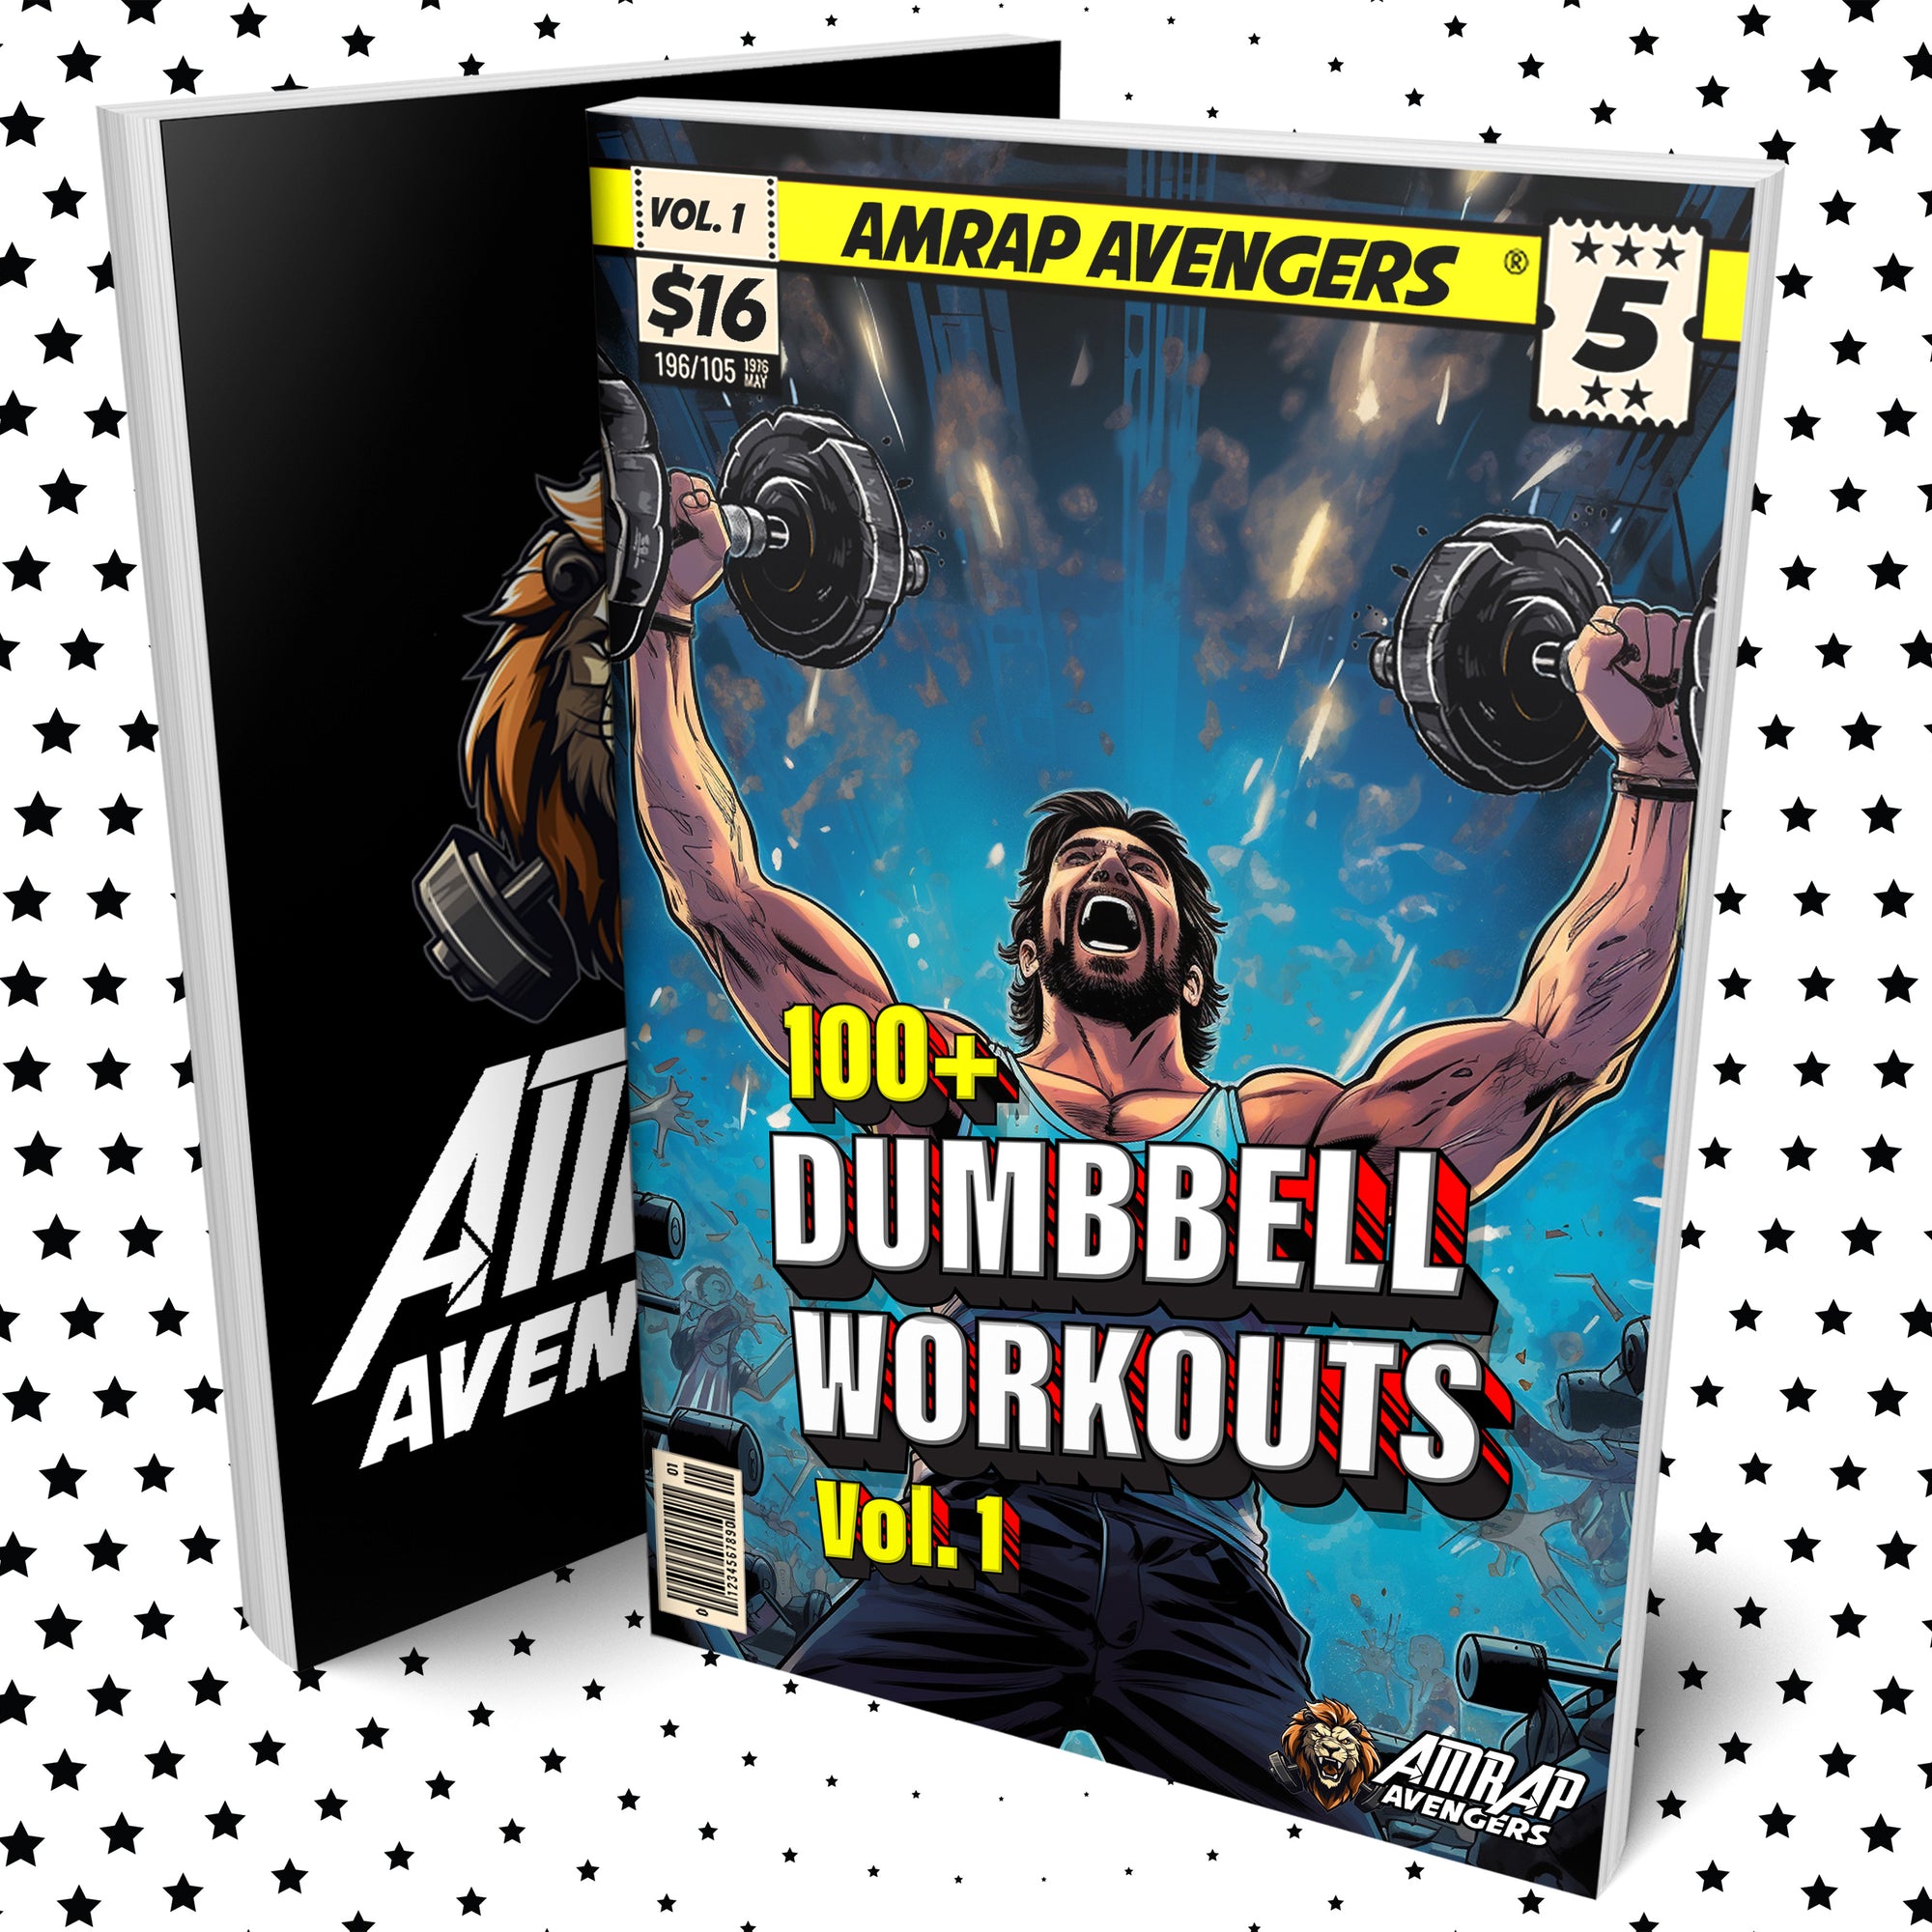 100+ Dumbbell Workouts Vol. 1